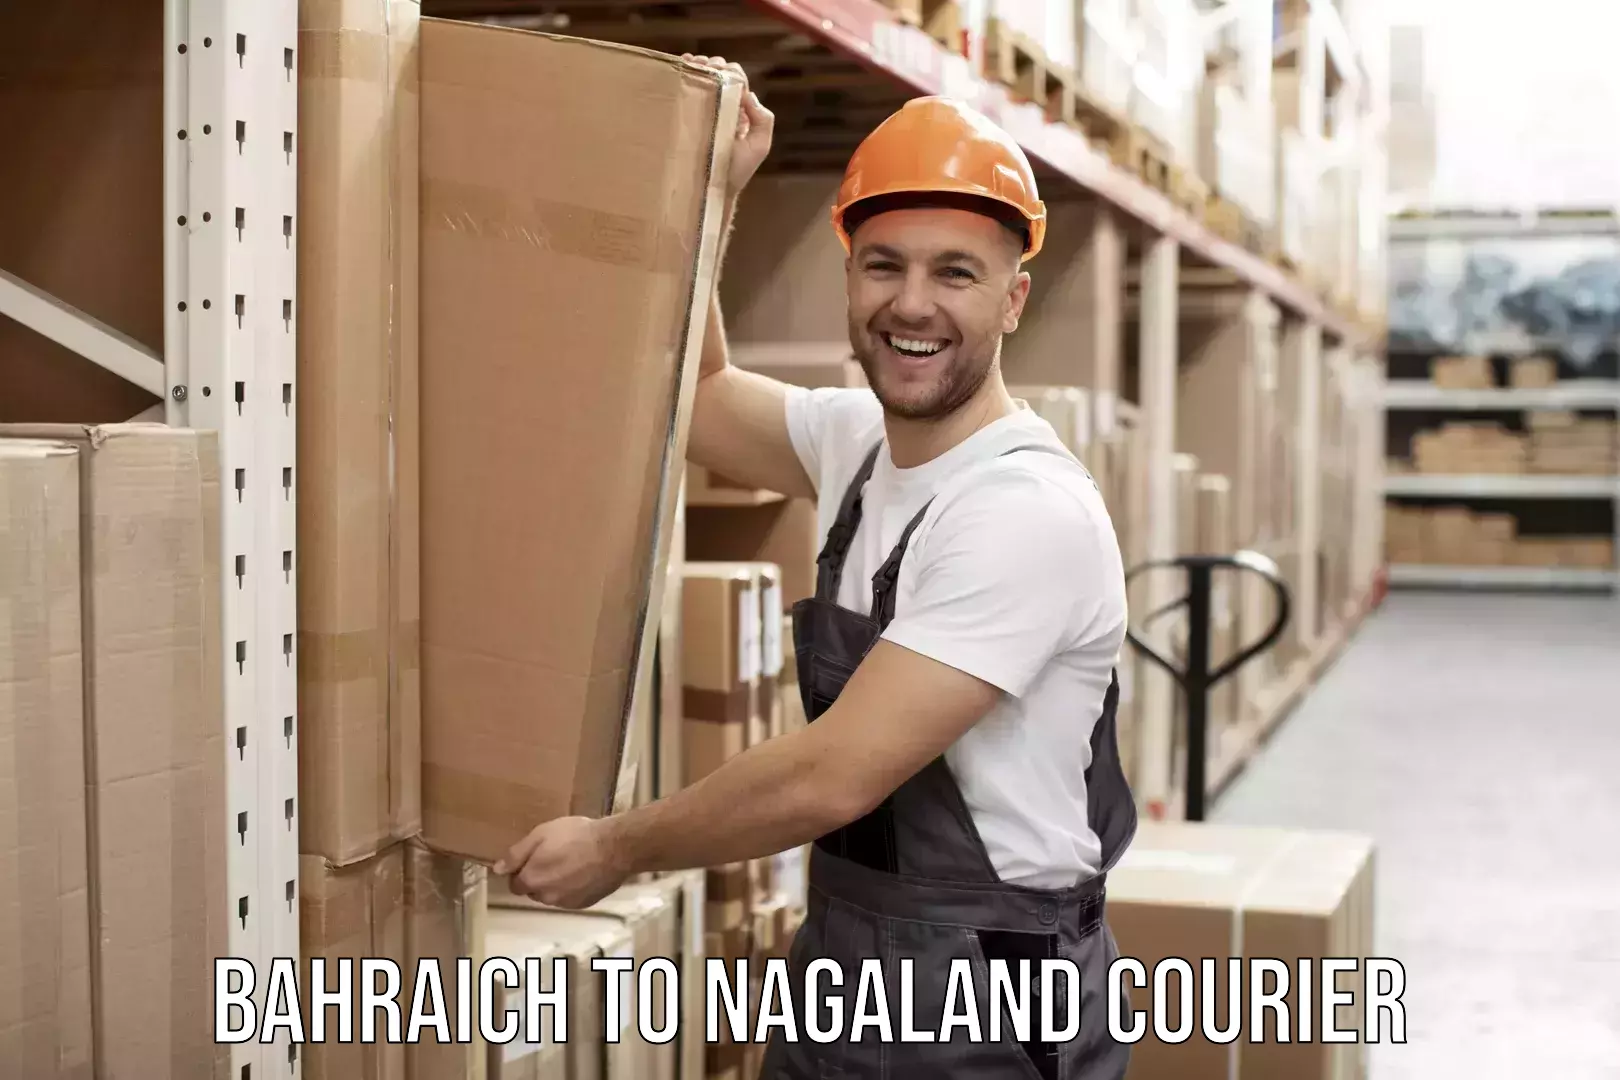 Furniture relocation experts Bahraich to Nagaland